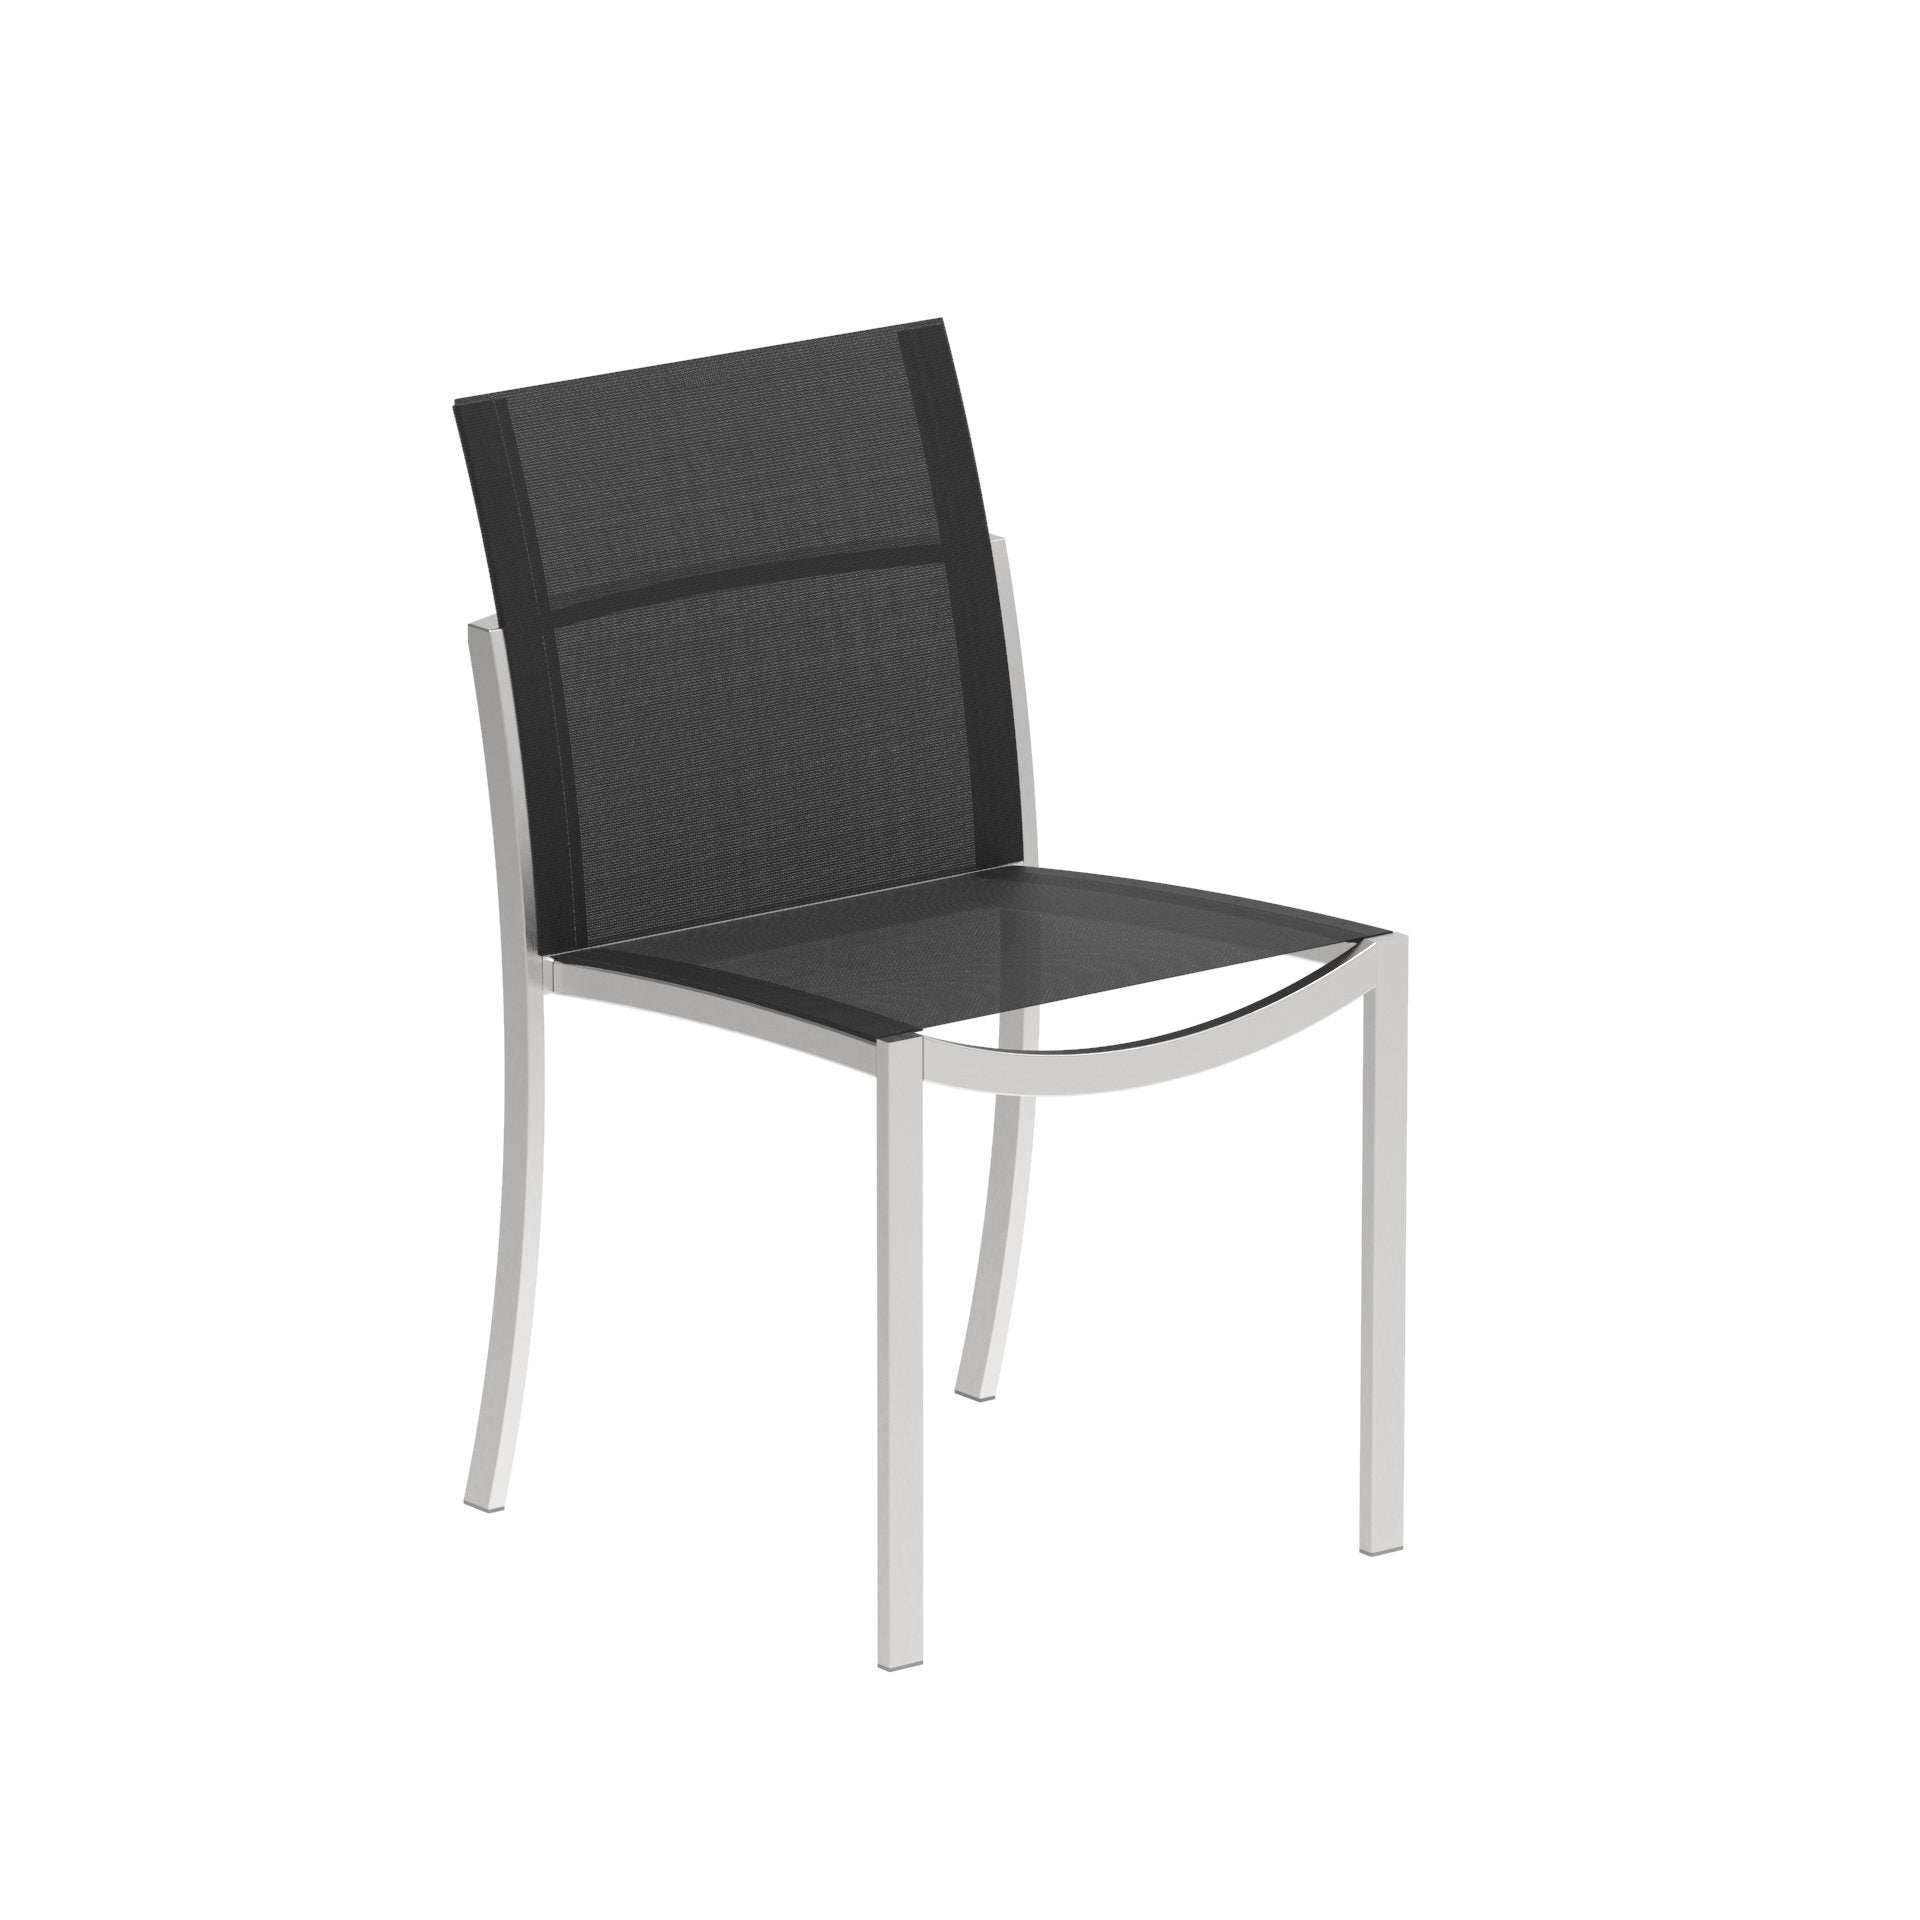 O-Zon 47 Dining Chair in Black